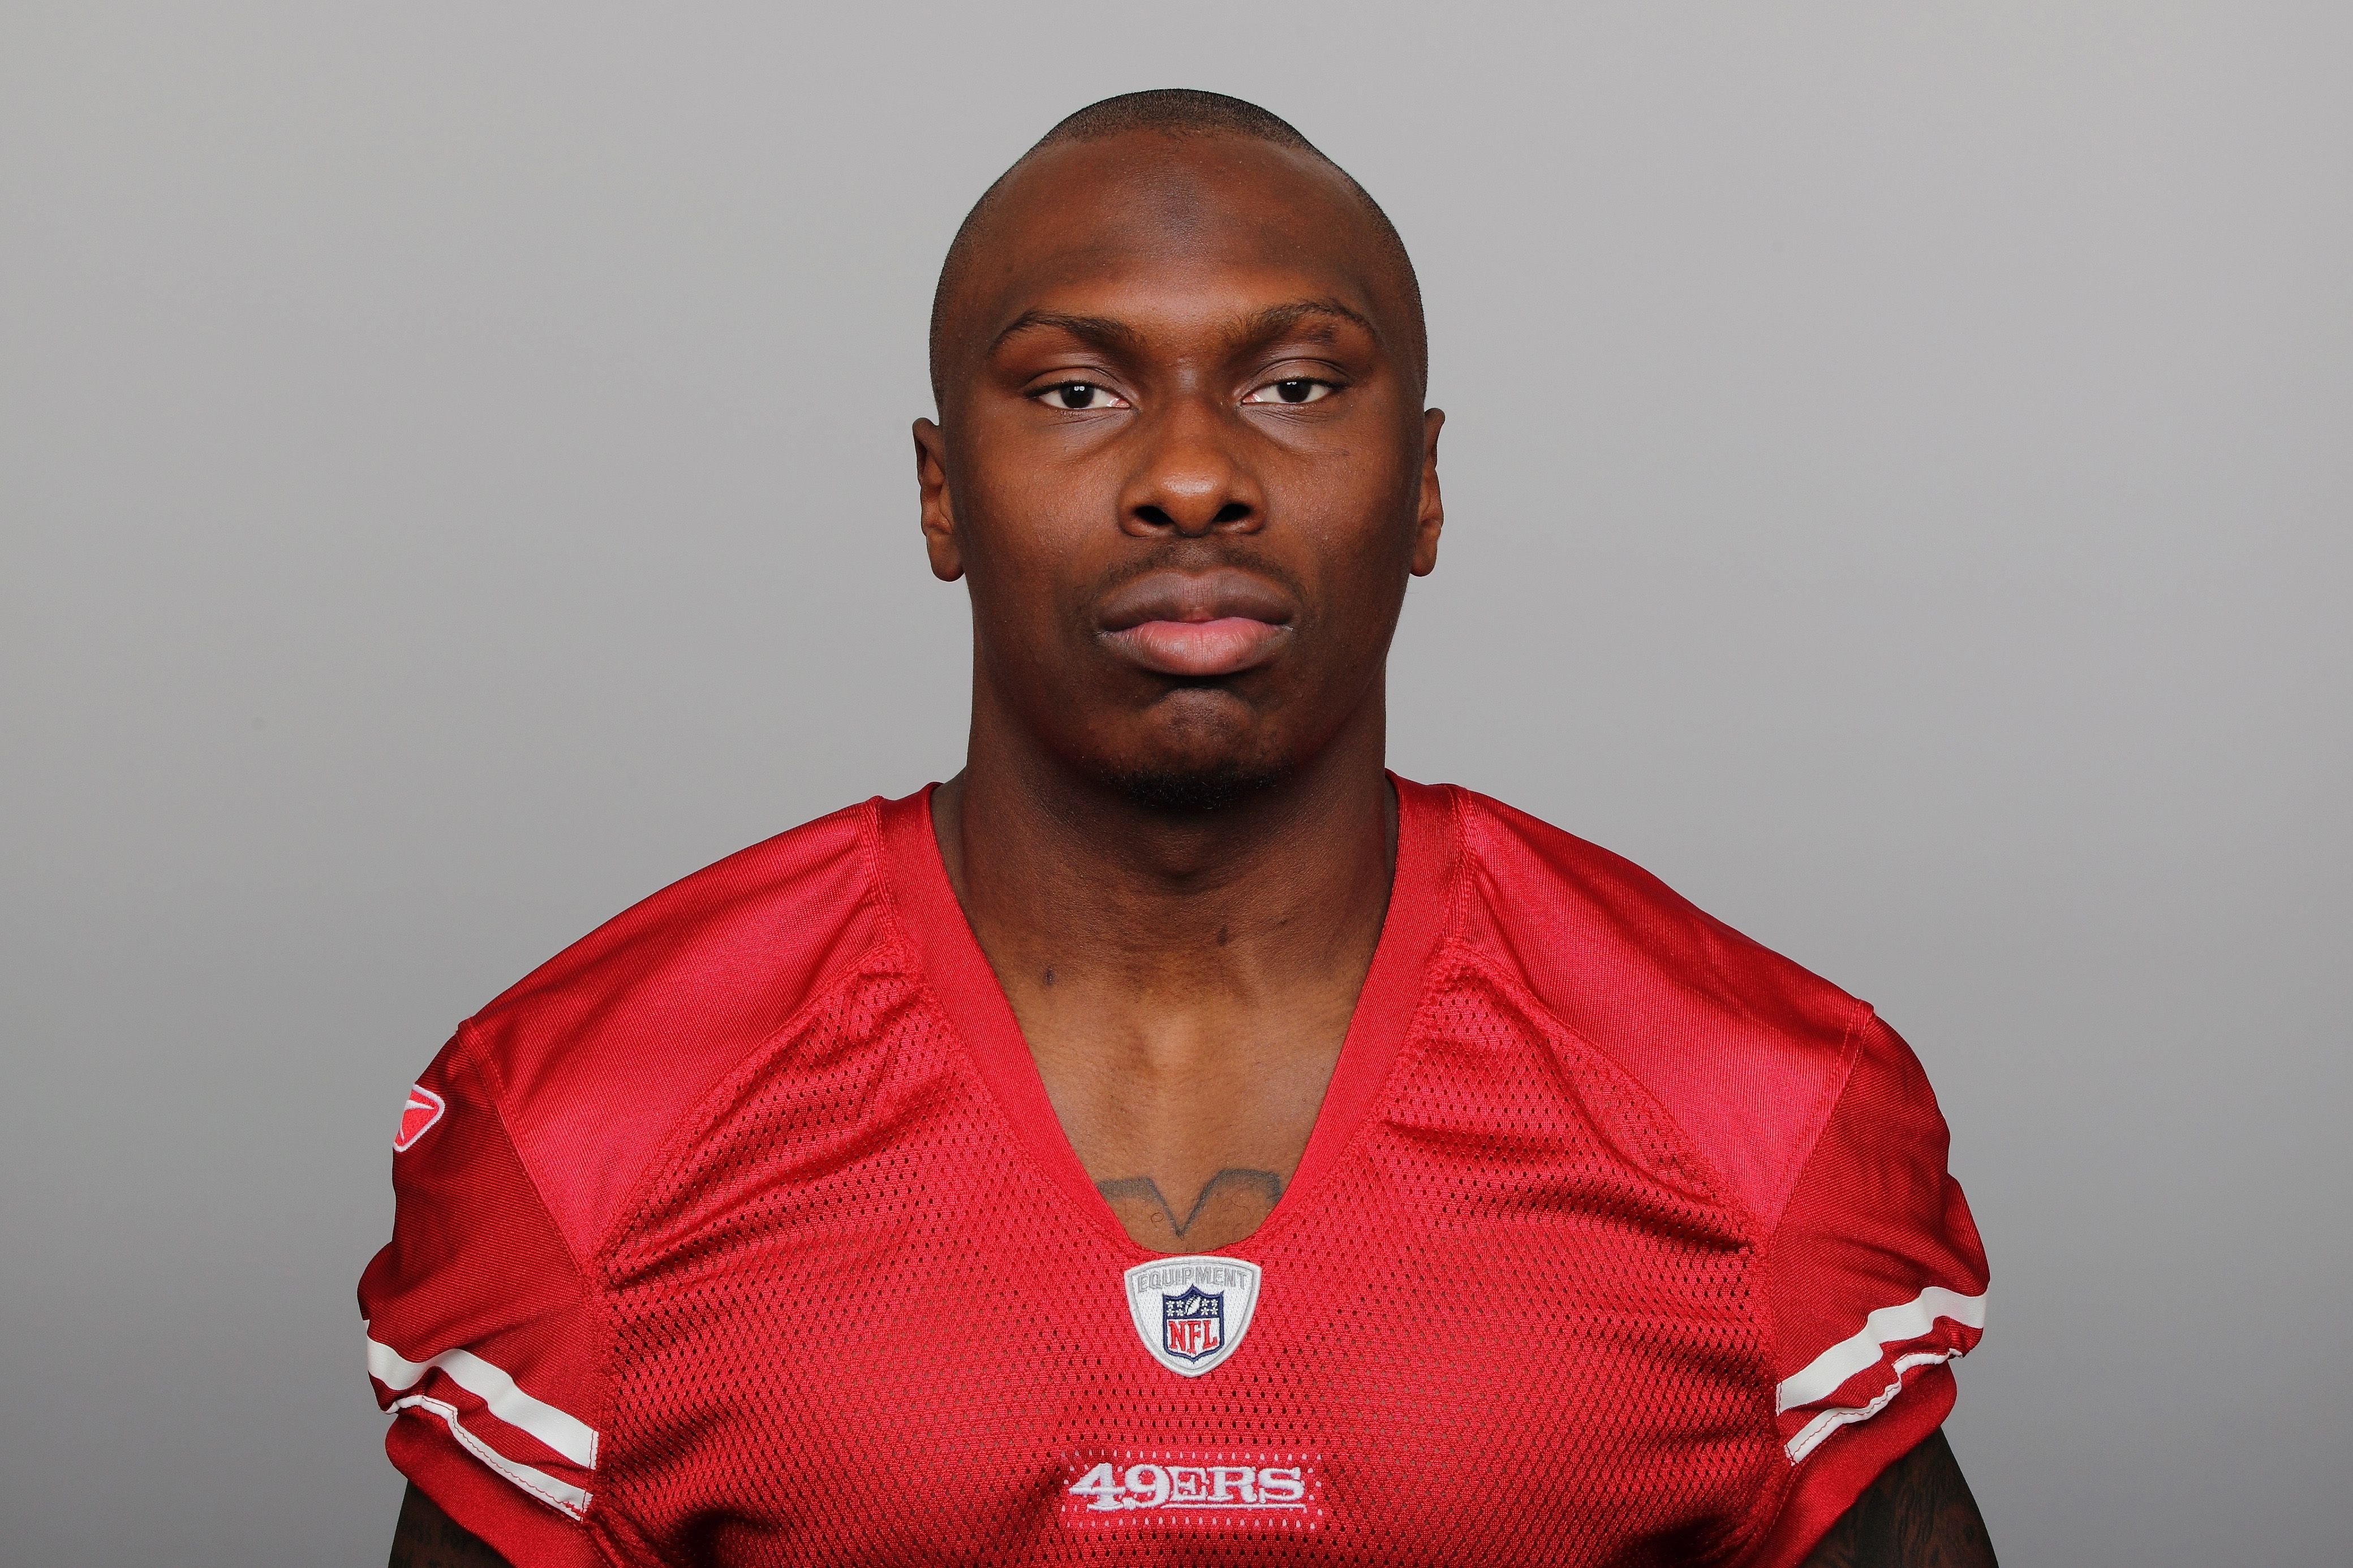 Phillip Adams of the San Francisco 49ers poses for his NFL headshot circa 2011 | Getty Images